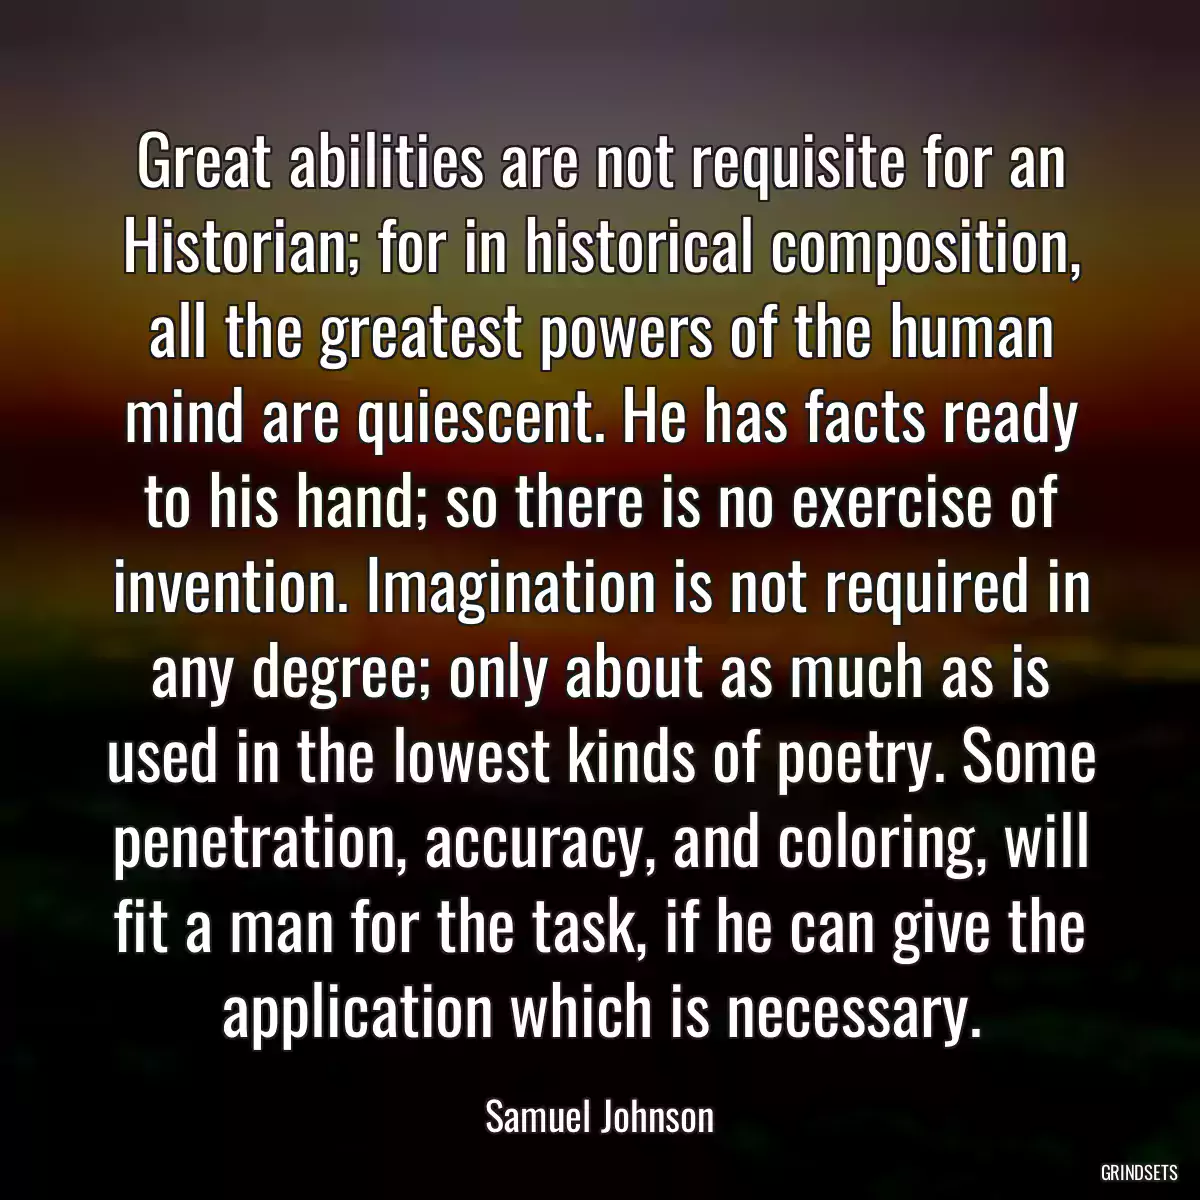 Great abilities are not requisite for an Historian; for in historical composition, all the greatest powers of the human mind are quiescent. He has facts ready to his hand; so there is no exercise of invention. Imagination is not required in any degree; only about as much as is used in the lowest kinds of poetry. Some penetration, accuracy, and coloring, will fit a man for the task, if he can give the application which is necessary.